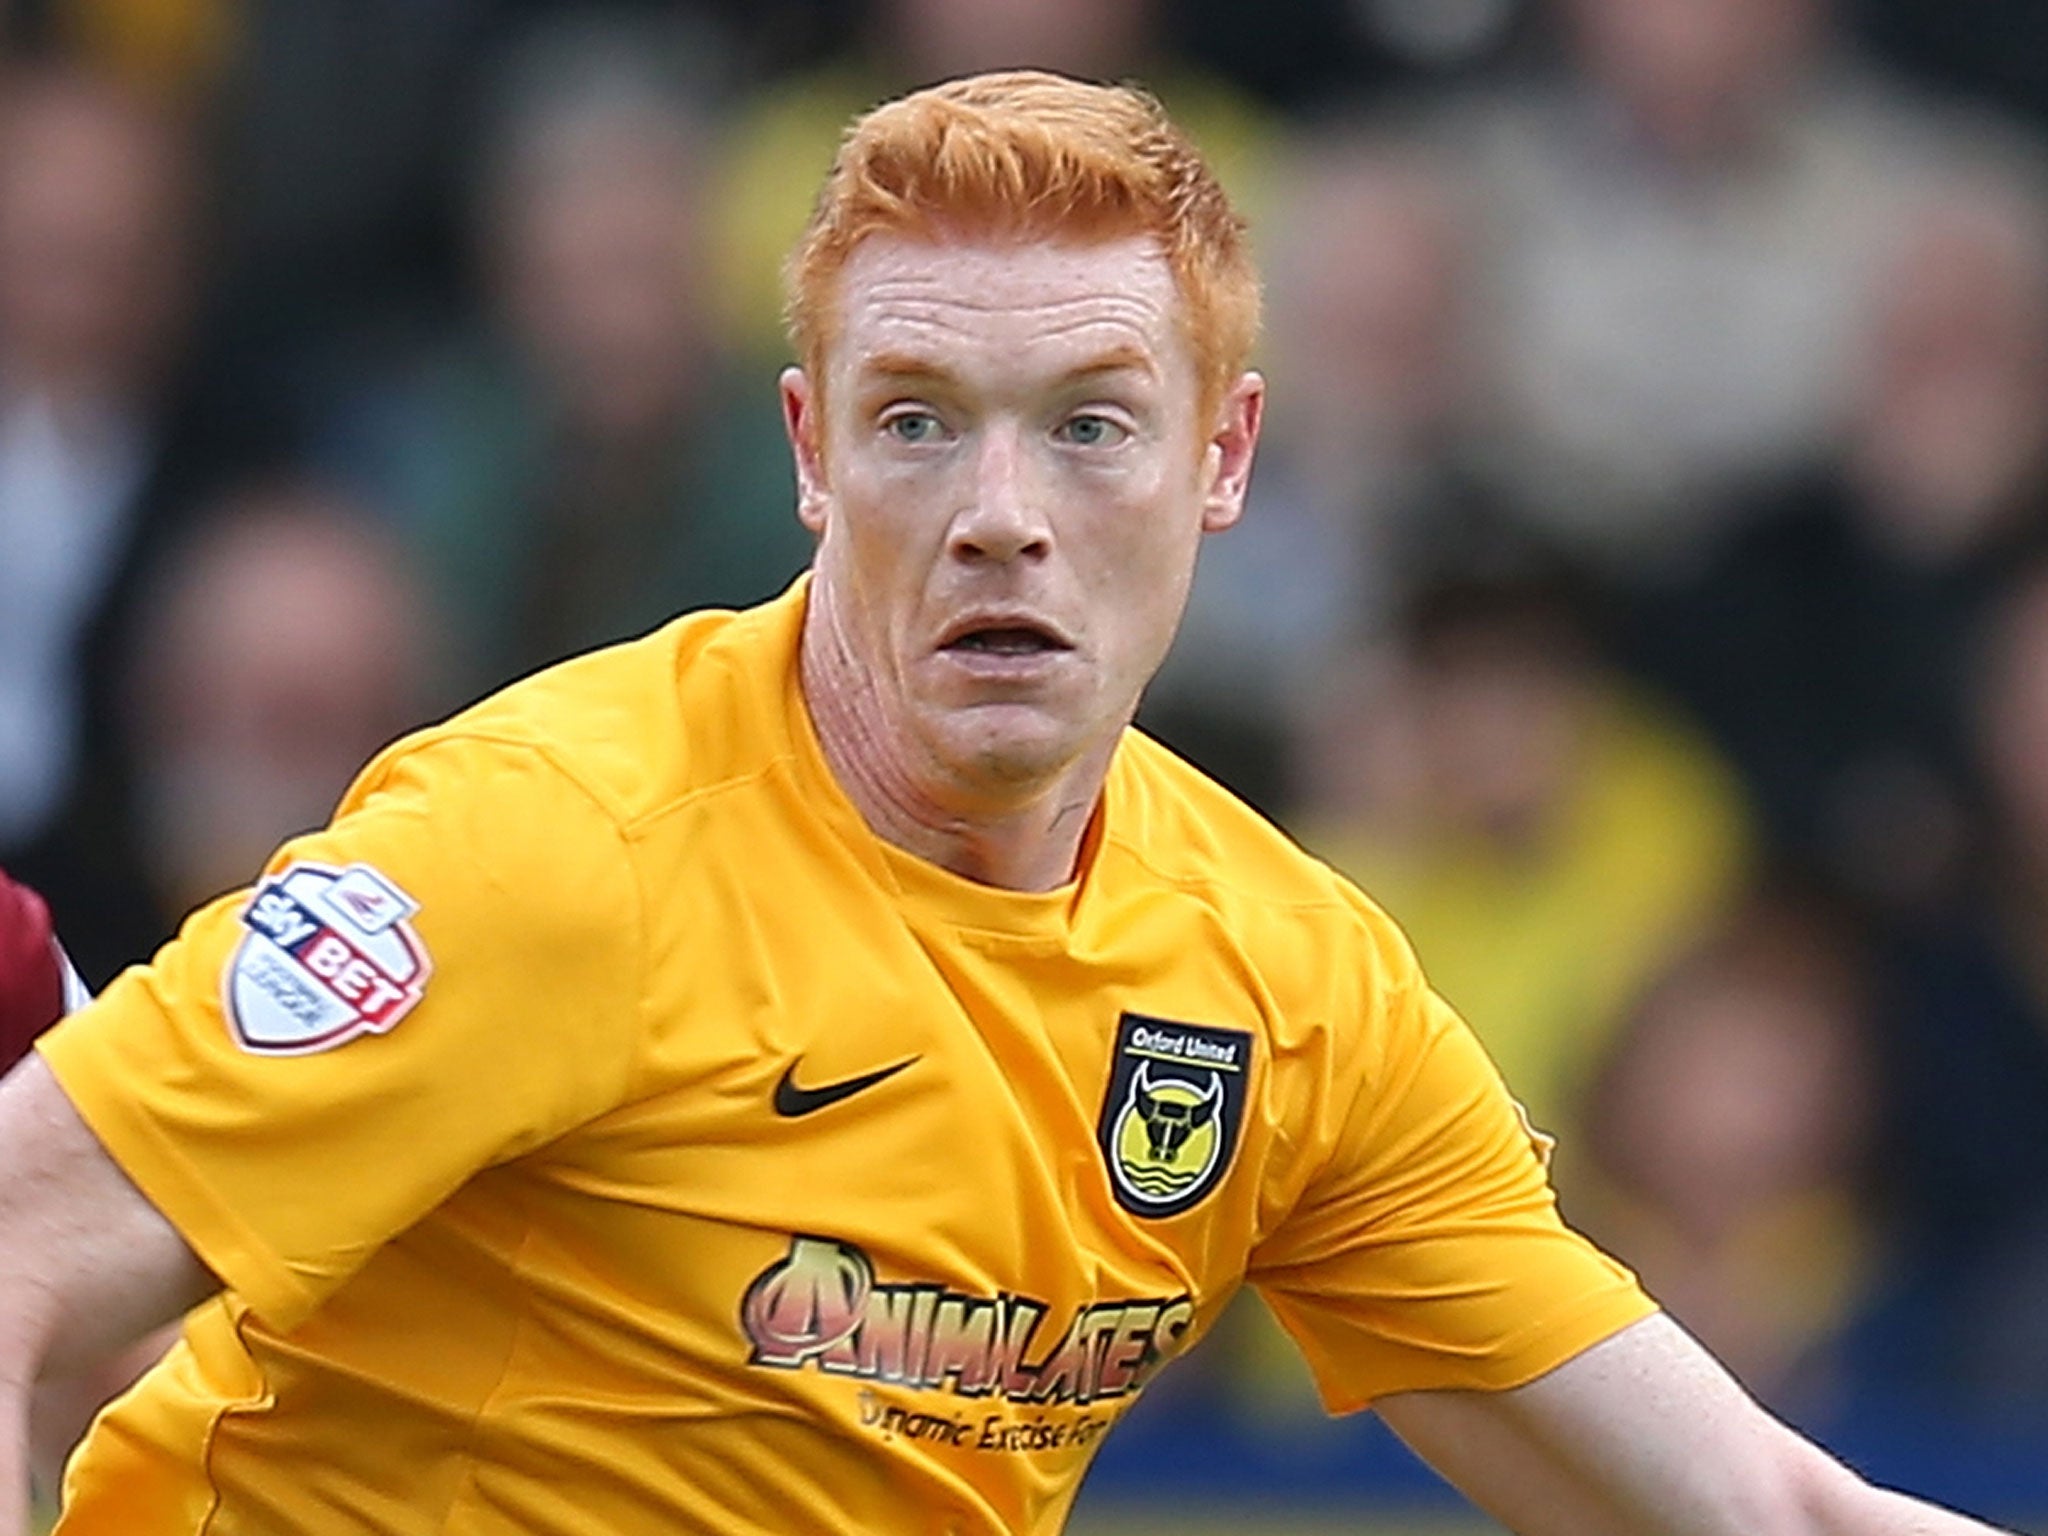 Dave Kitson in action for Oxford United